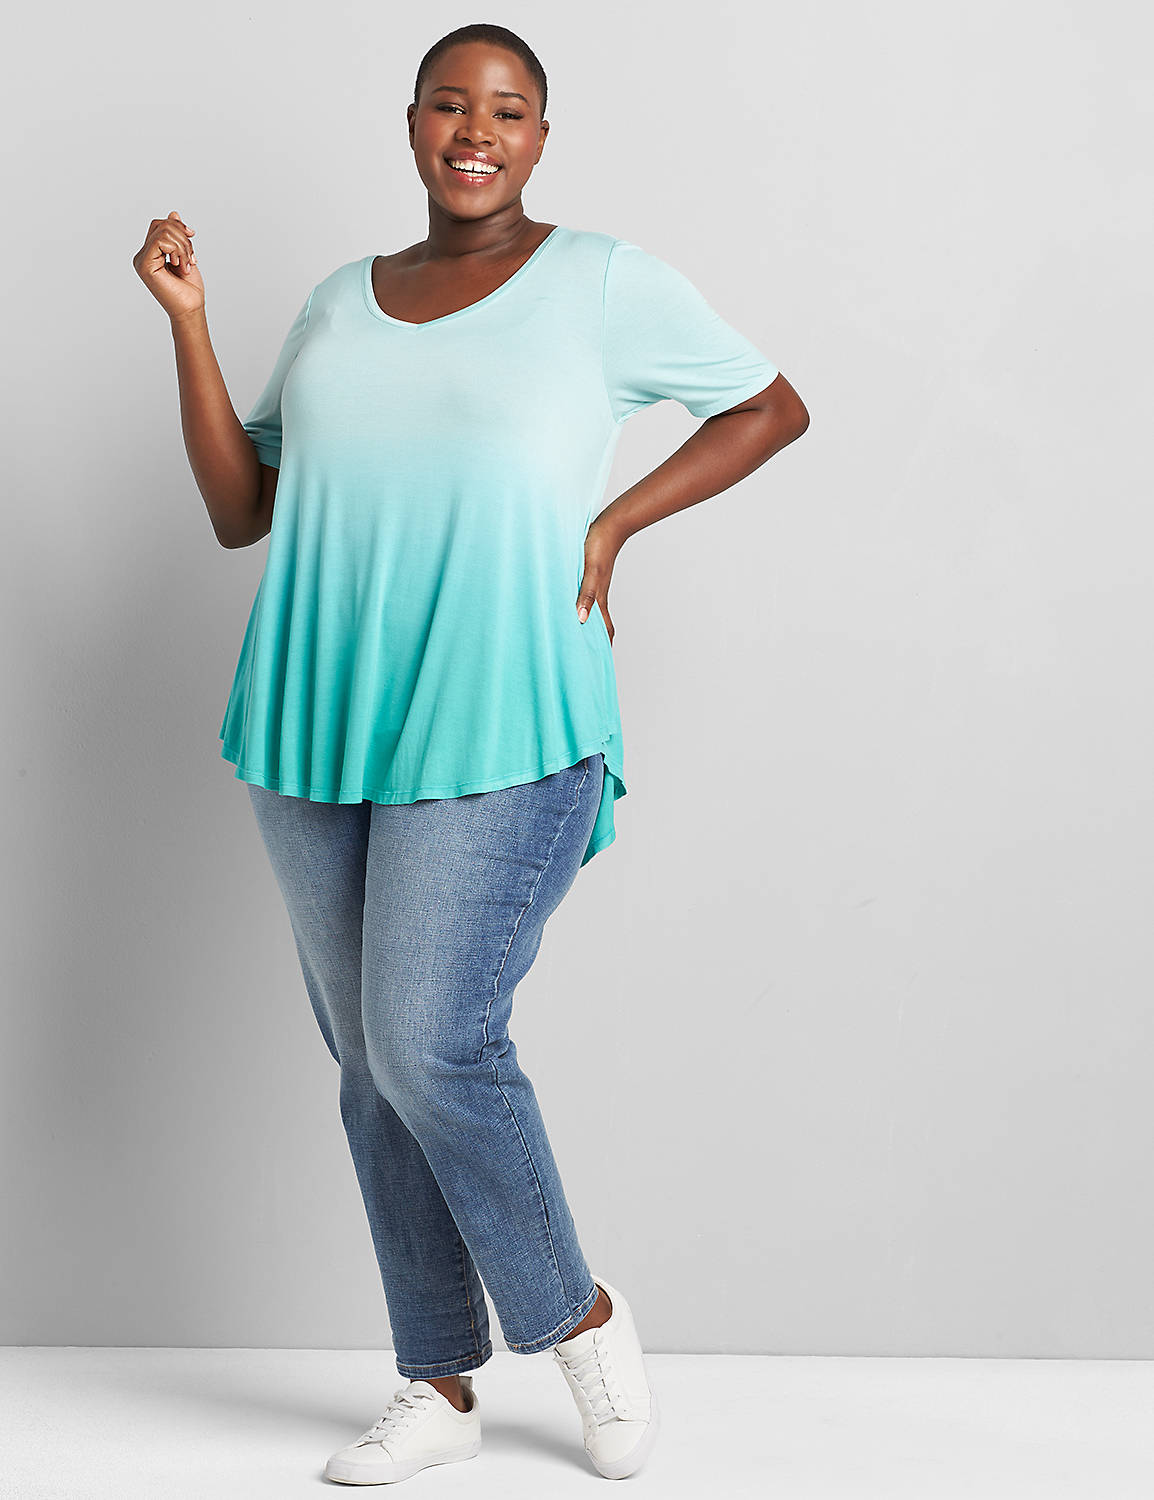 Perfect Sleeve Vneck Drapey Tunic 1118711:Teal Zeal CSI 0601628:14/16 Product Image 3